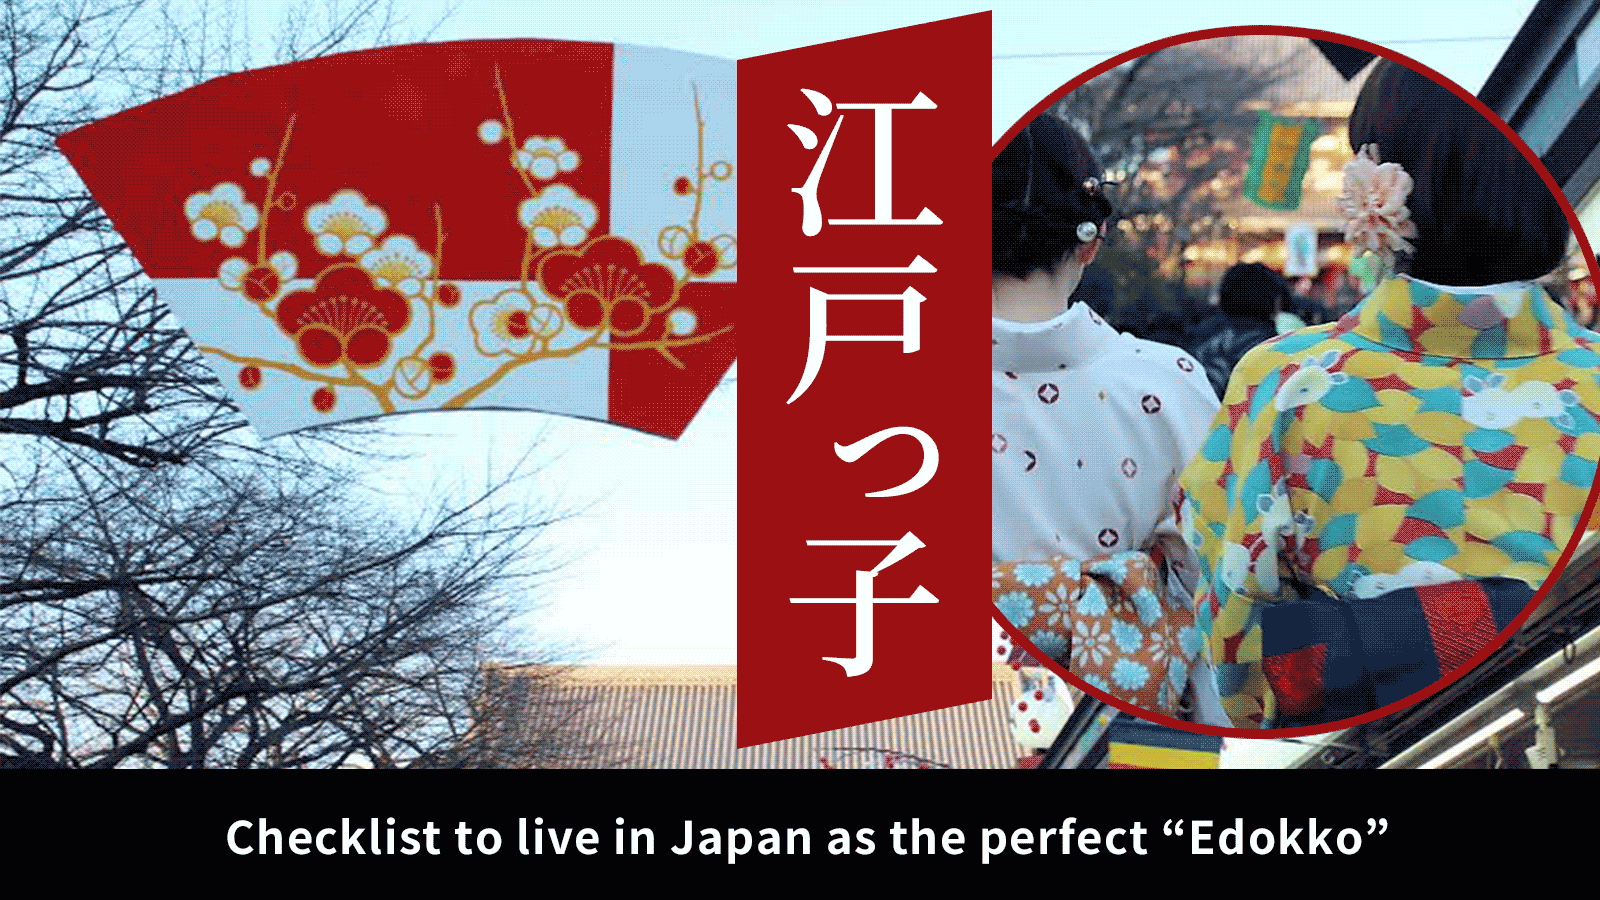 Checklist to live in Japan as the perfect “Edokko”